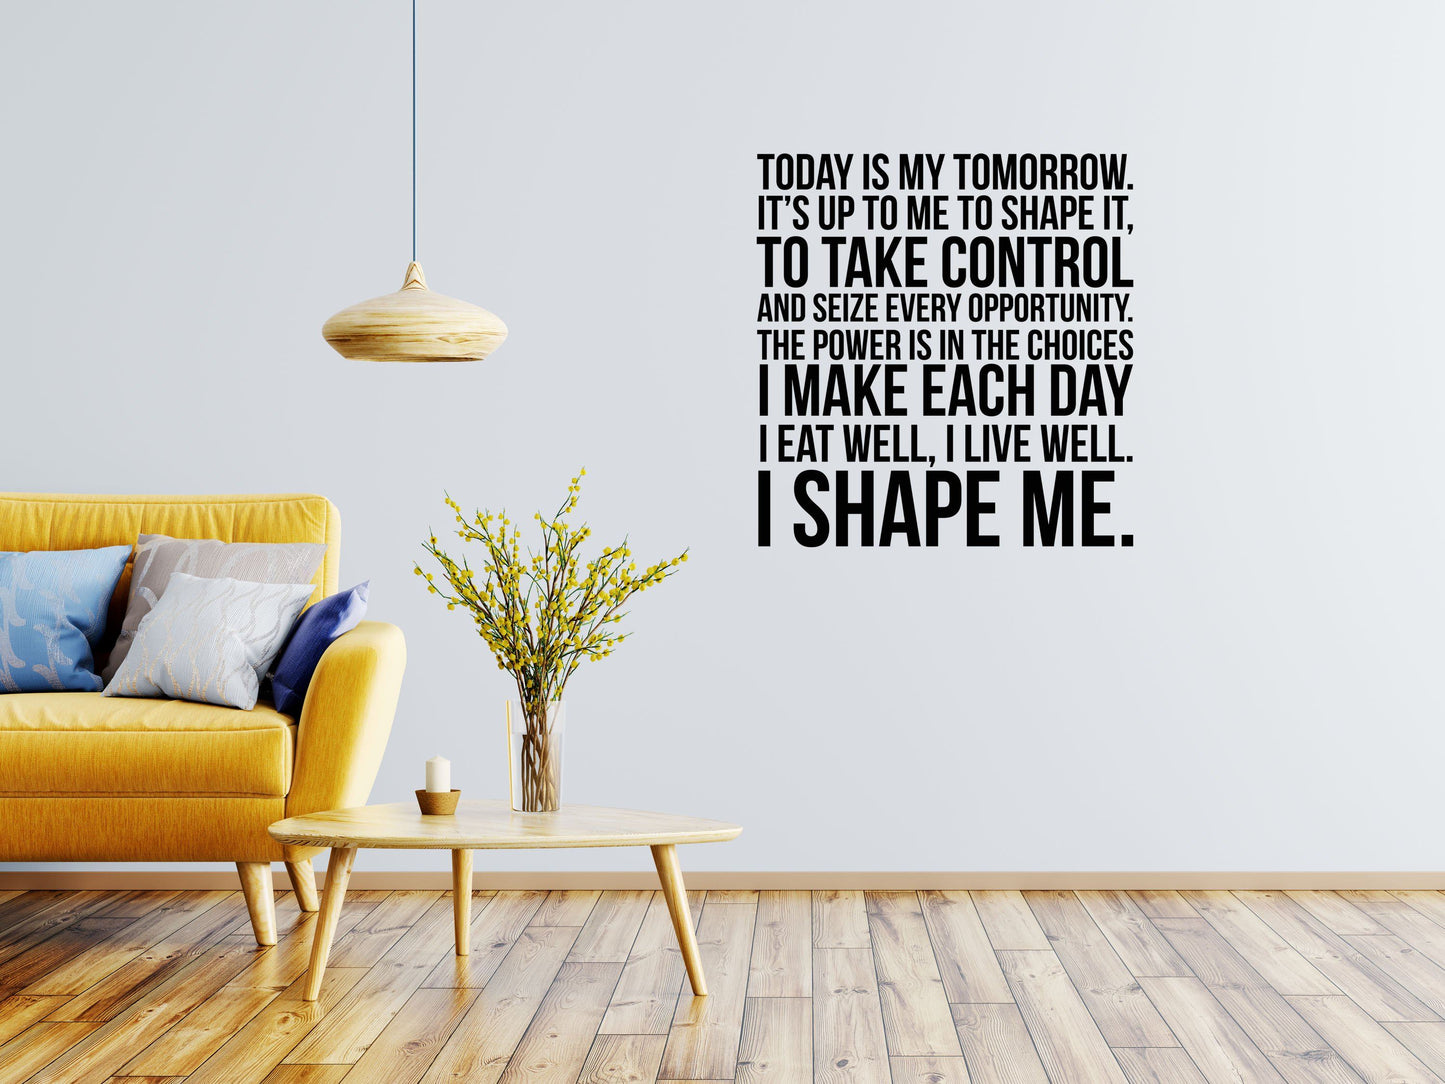 Today Is My Tomorrow Fitness Decal - Inspirational Vinyl Wall Decal Quote - Gym Wall Sticker- Workout Quote - Home Gym Wall Words Done 